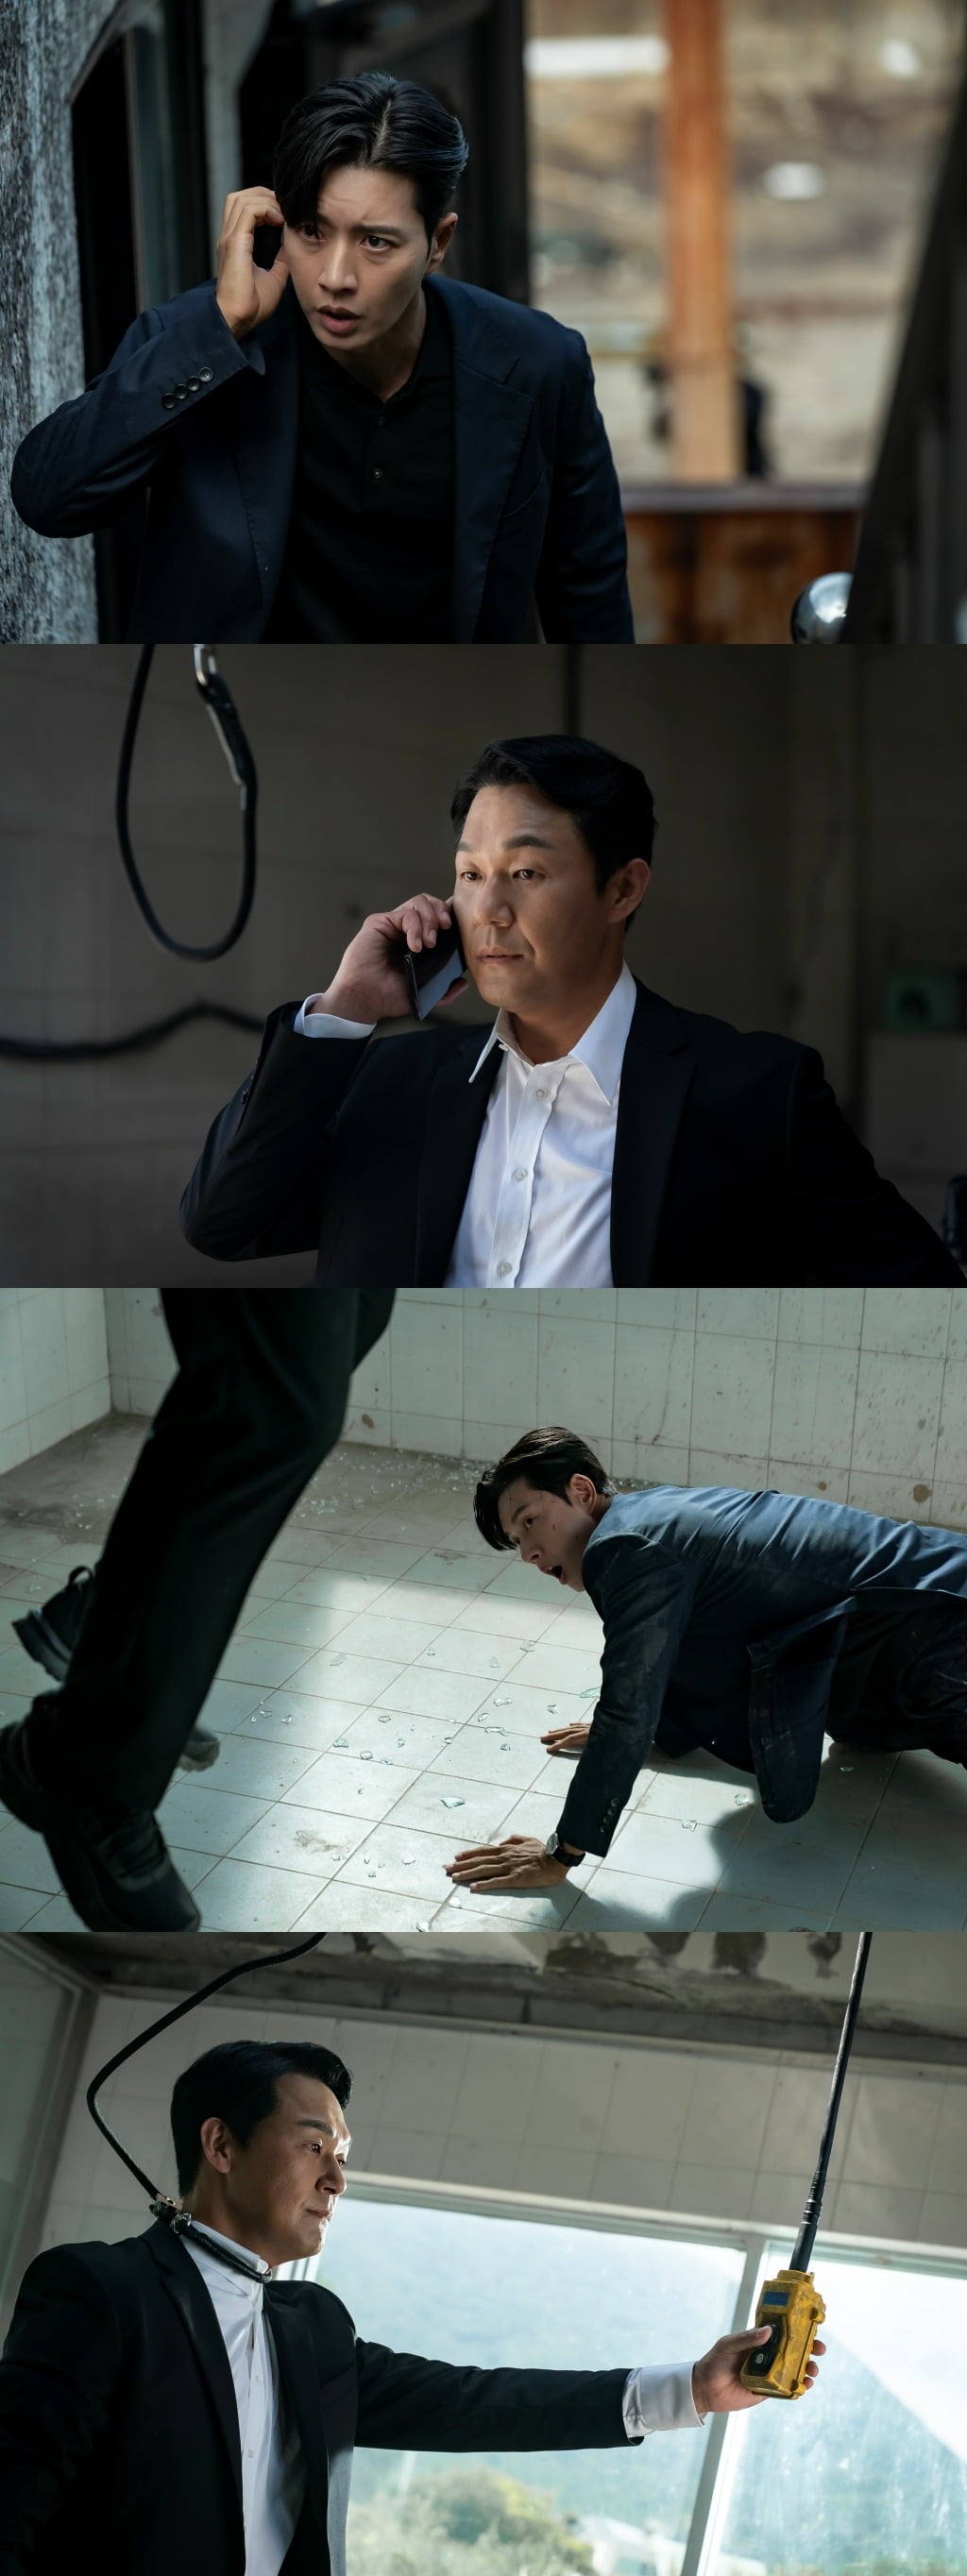 Park Sung-woong, extreme choice attempt in front of Park Hae-jin is 'shocking'